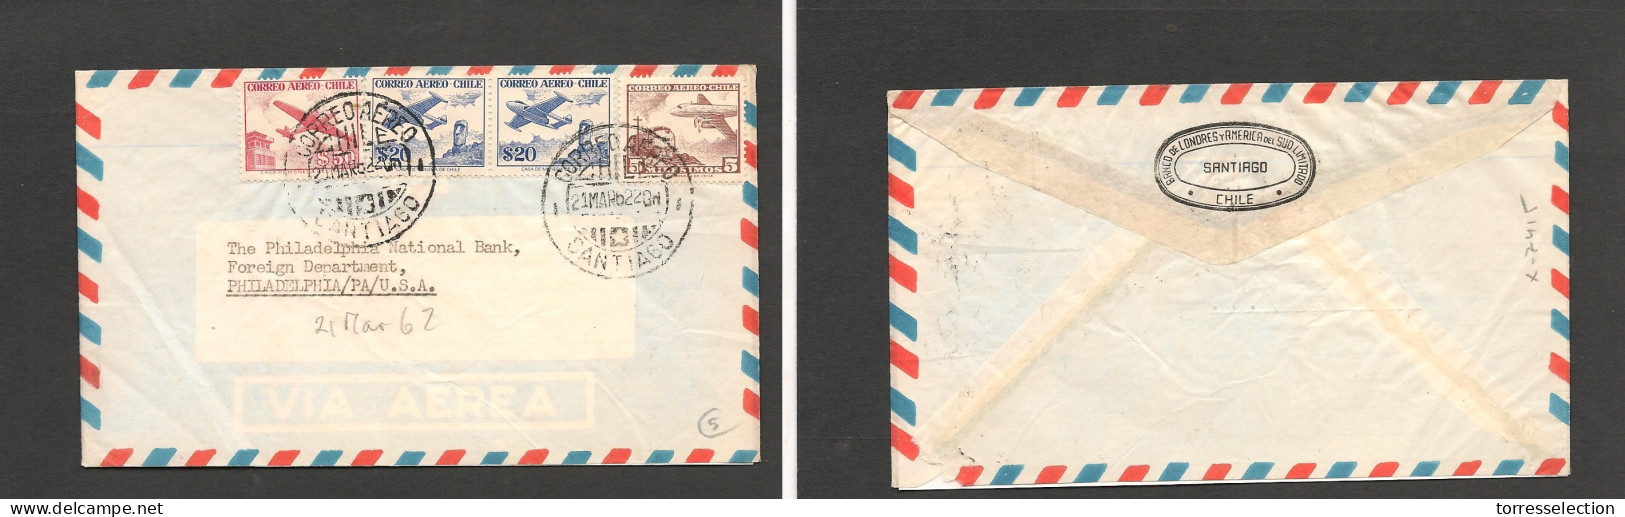 CHILE. Chile - Cover - 1962 21 March Stgo To USA Pha Air Mult Fkd Env $90,05 RateEx-Prof West UK Airmails Coll.- . Easy  - Chili